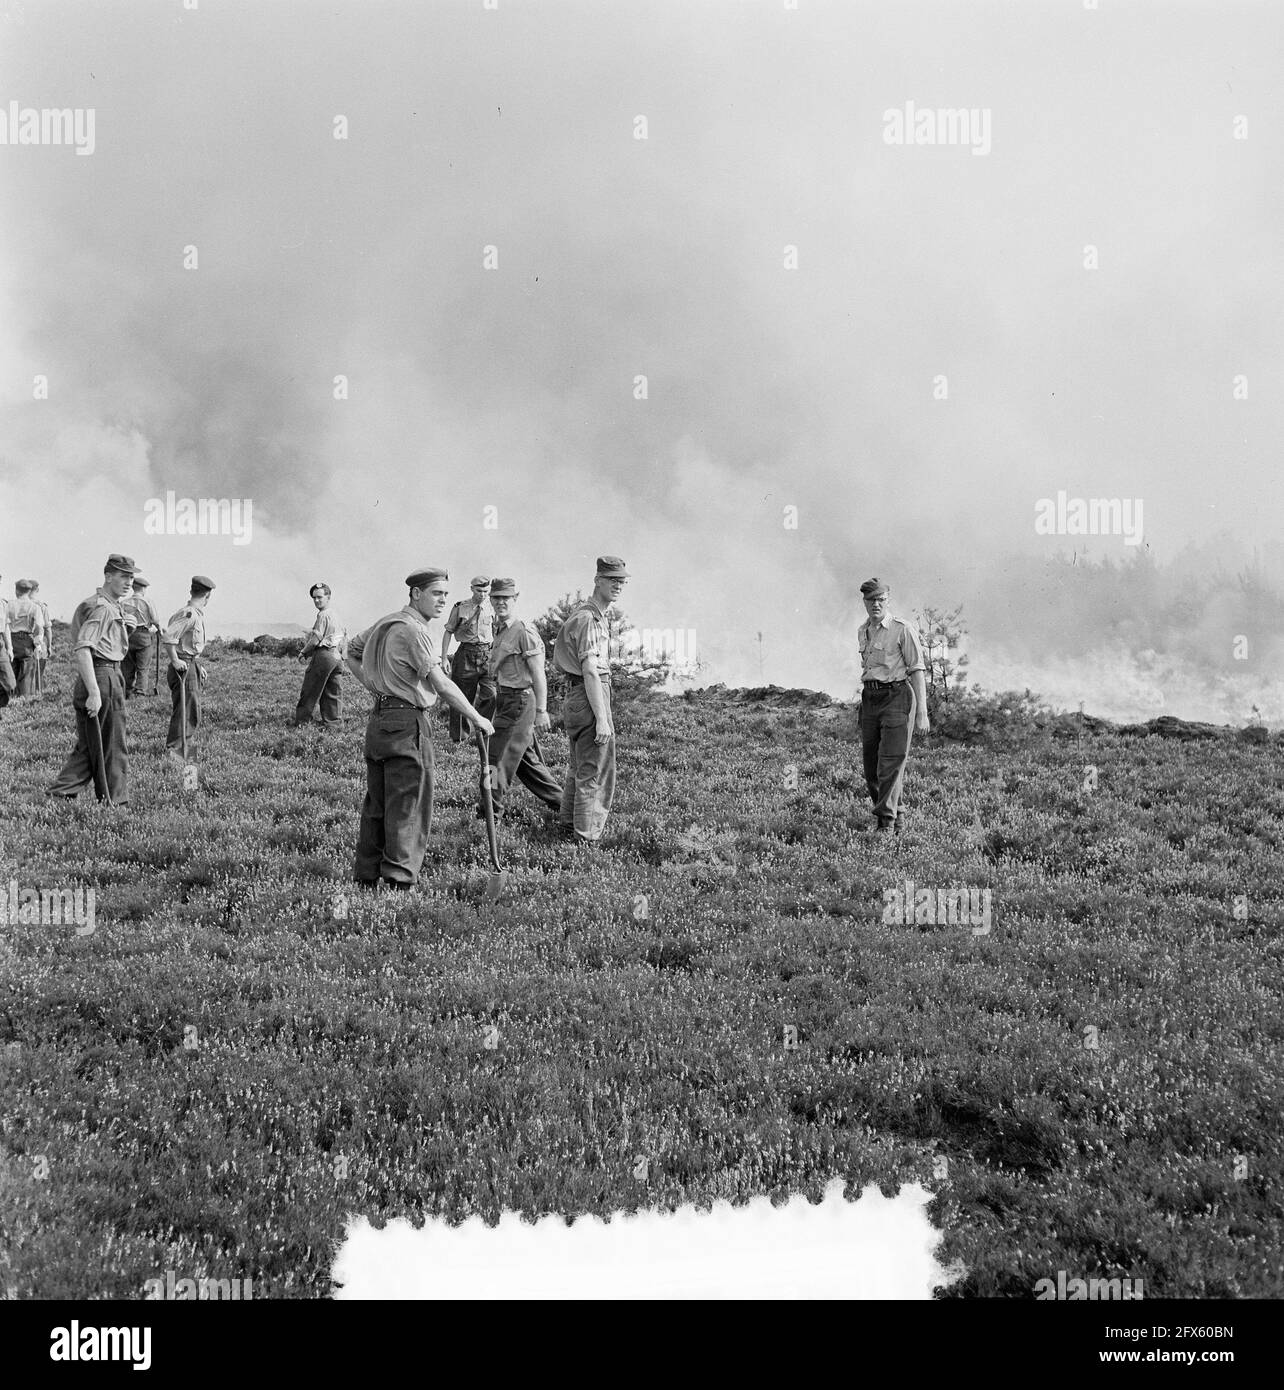 Large heathland fire on the Veluwe (Oldebroek), September 1, 1955, The Netherlands, 20th century press agency photo, news to remember, documentary, historic photography 1945-1990, visual stories, human history of the Twentieth Century, capturing moments in time Stock Photo